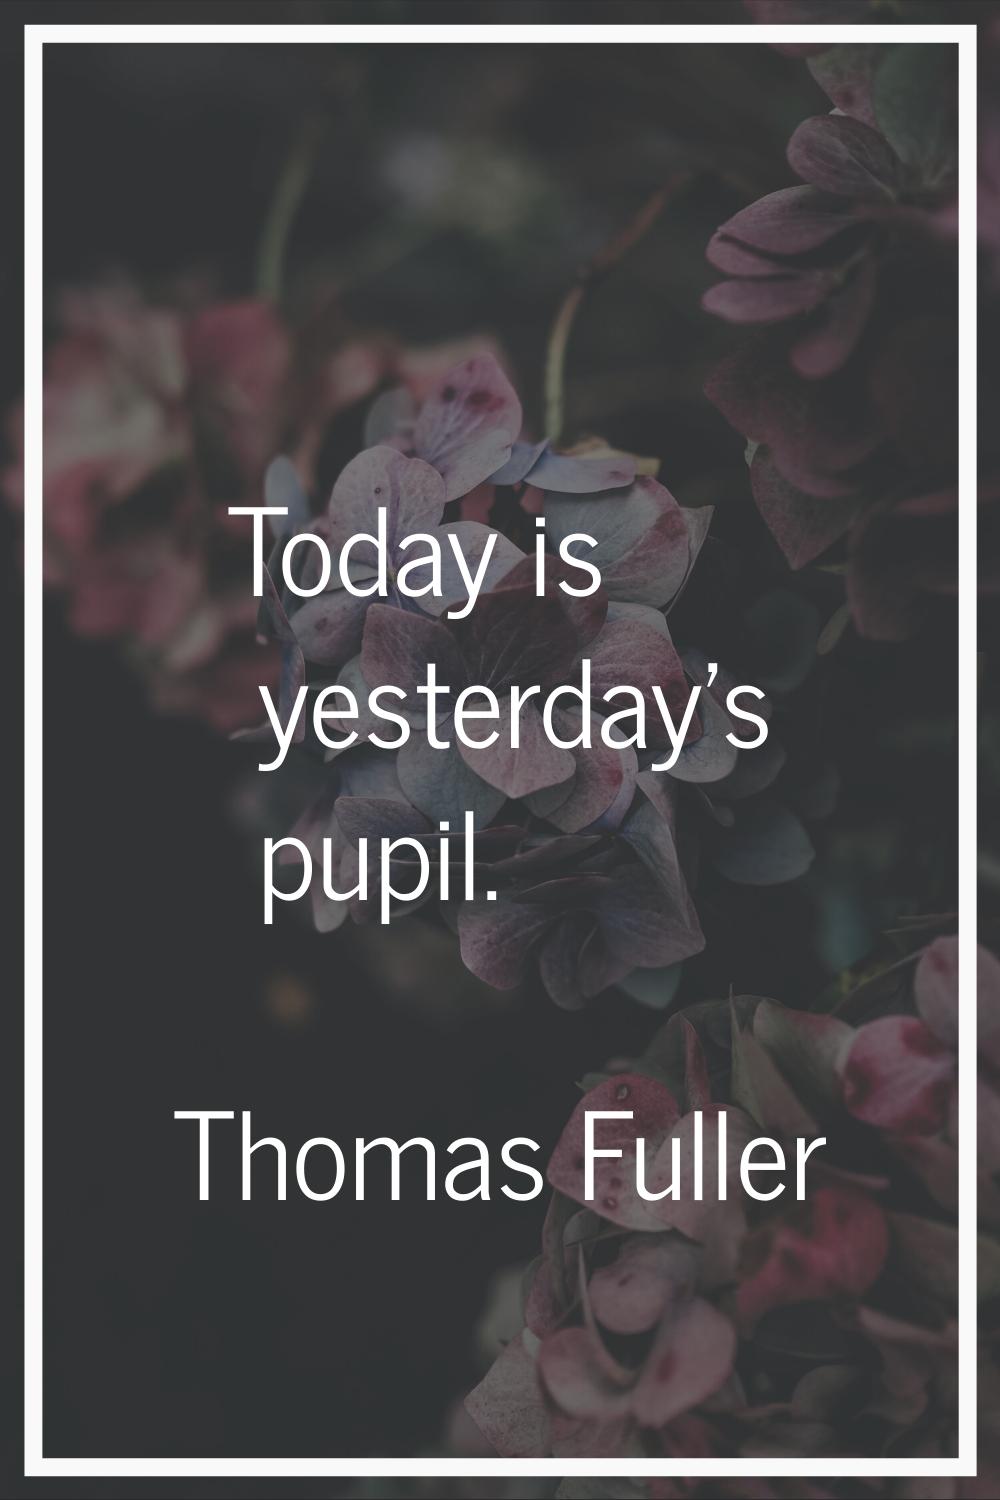 Today is yesterday's pupil.